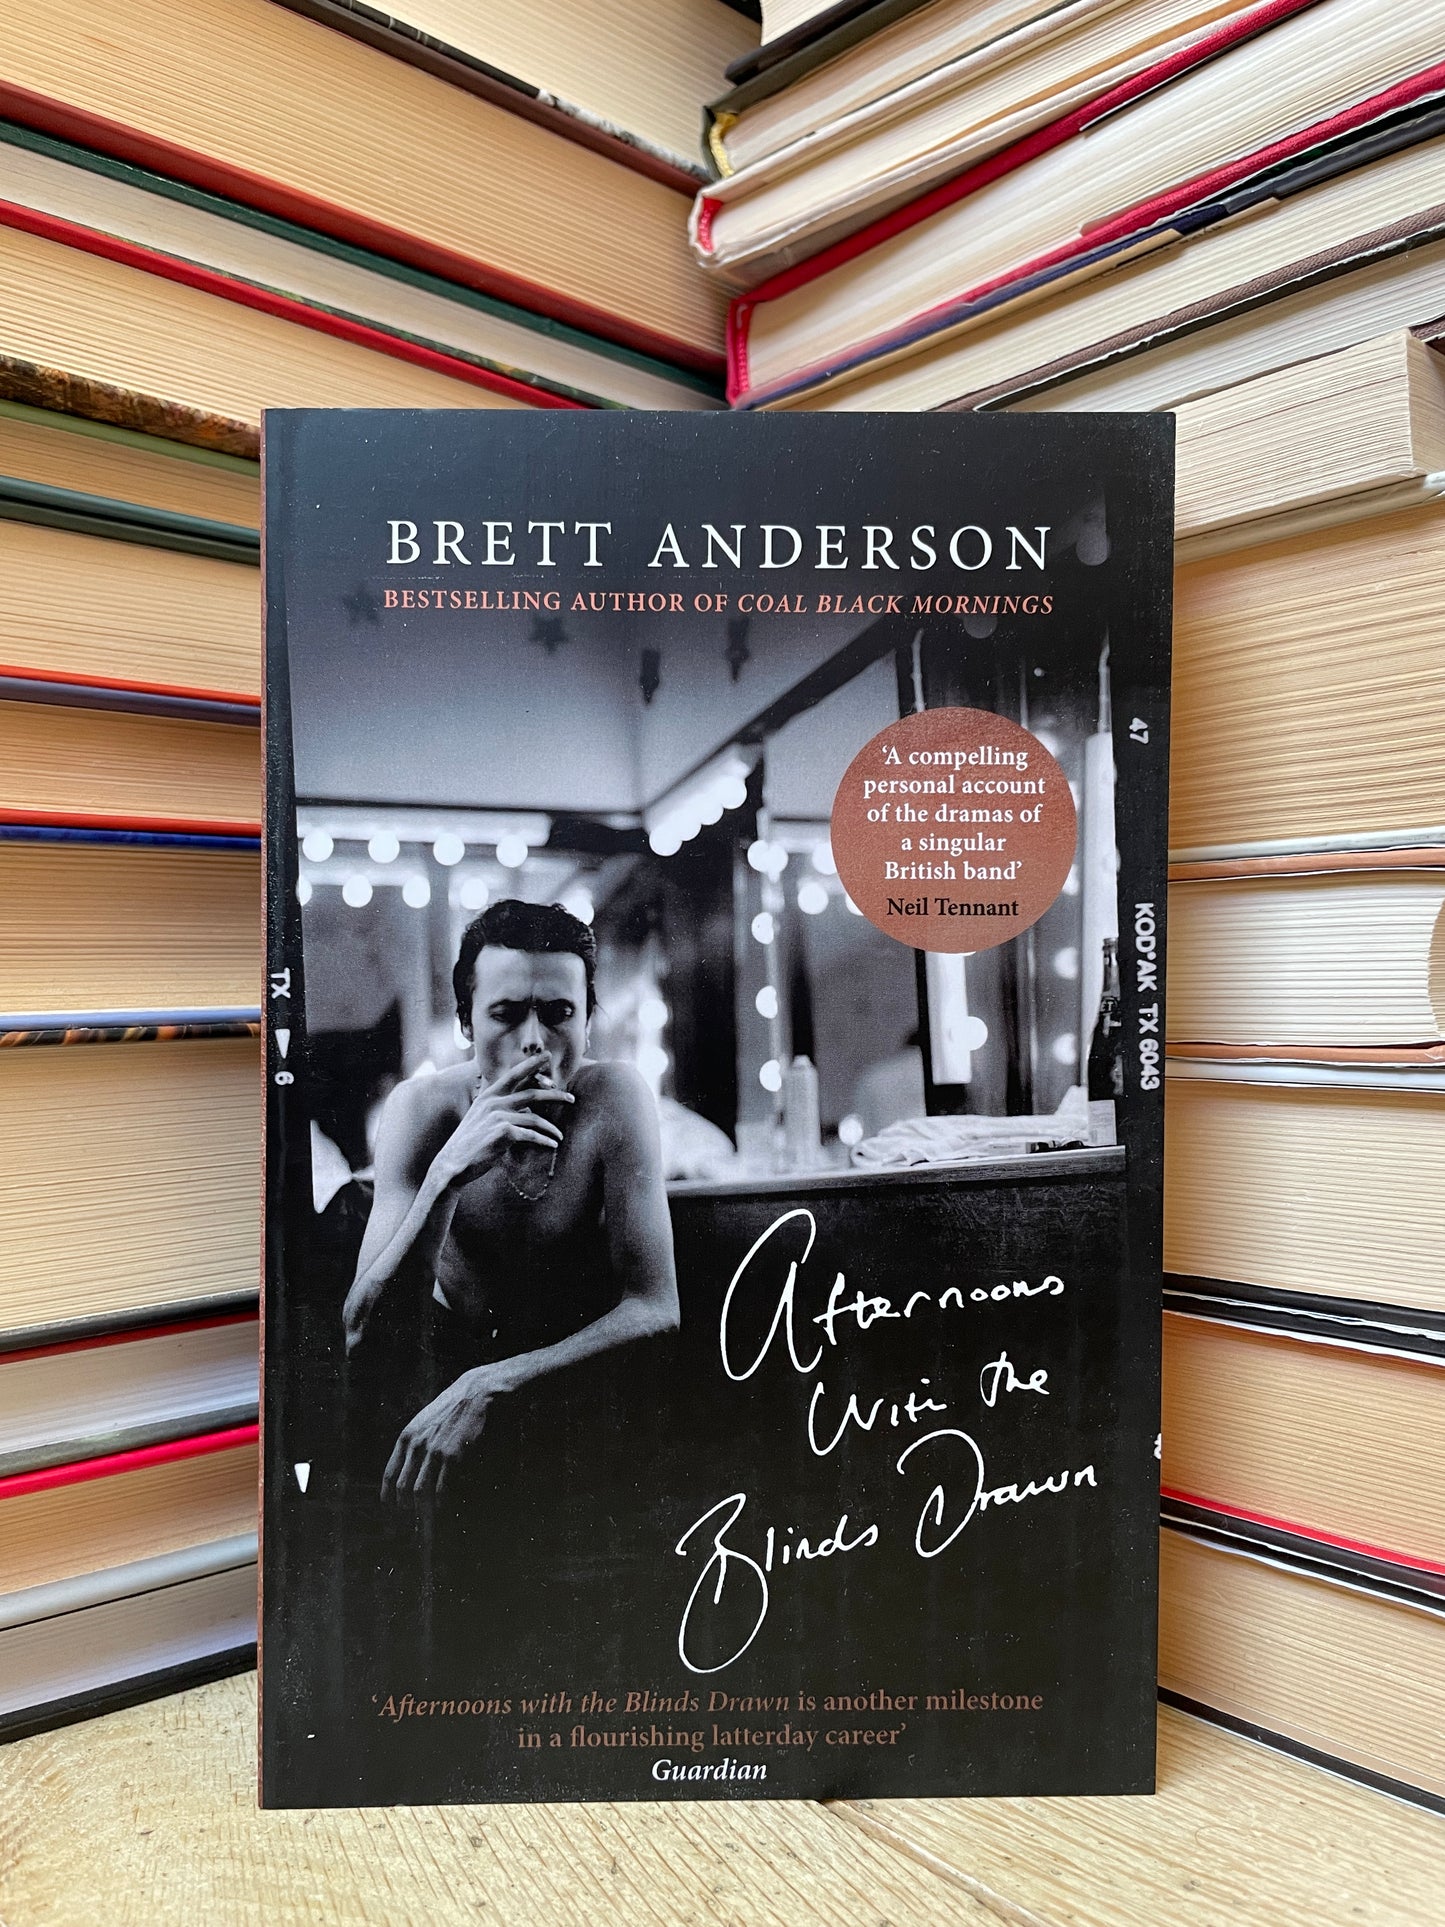 Brett Anderson - Afternoons with the Blinds Drawn (NAUJA)